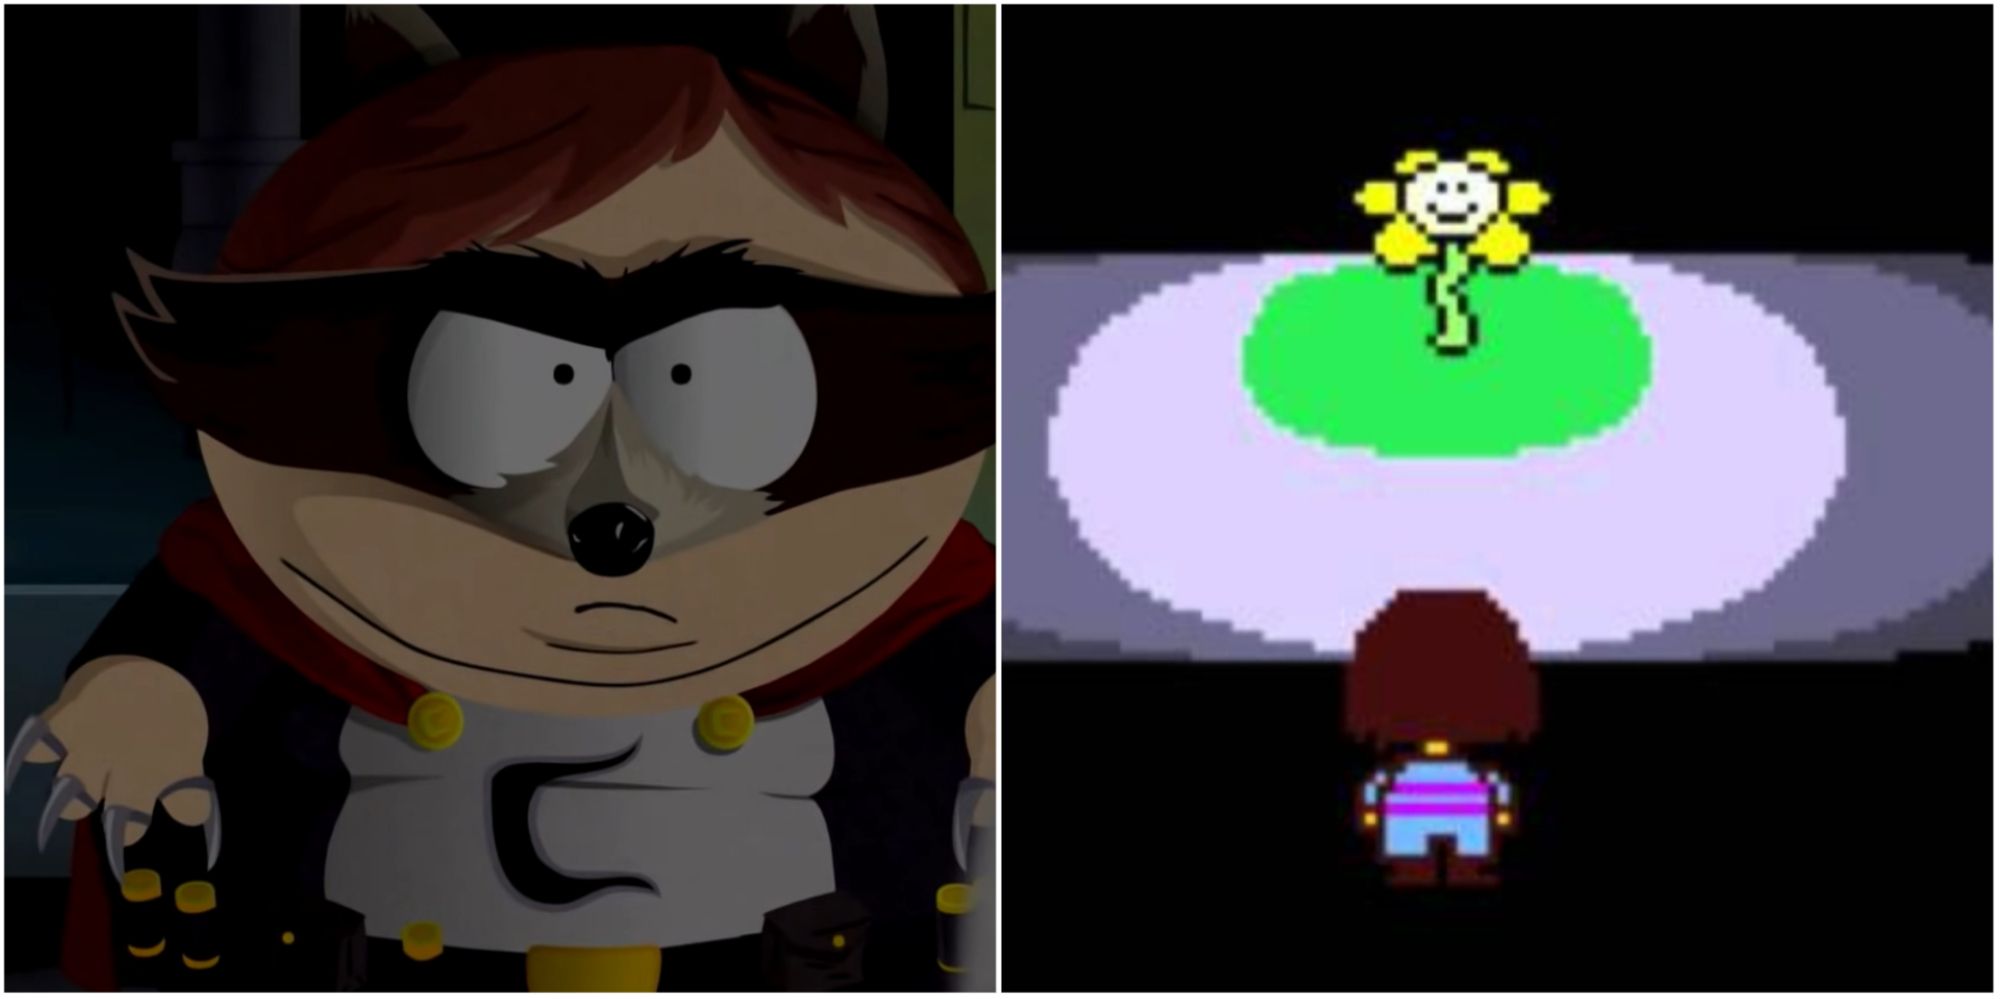 Fourth Walls Break Featured Split Image South Park and Undertale